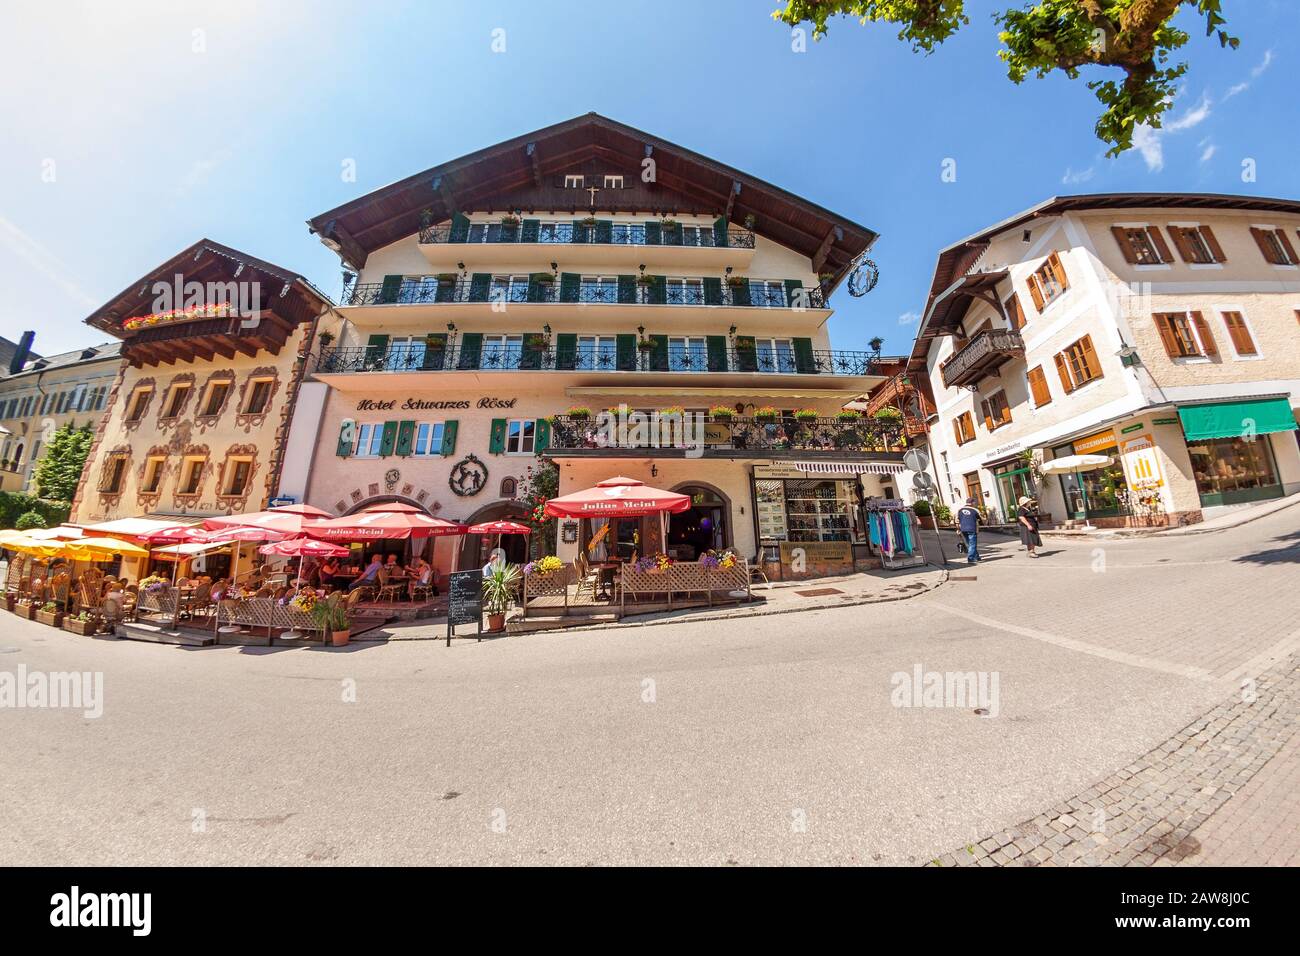 St. Wolfgang, Austria - June 23, 2014: Hotel Schwarzes Roessl at the famous lake Wolfgangsee. Popular travel destination within Austria. Stock Photo